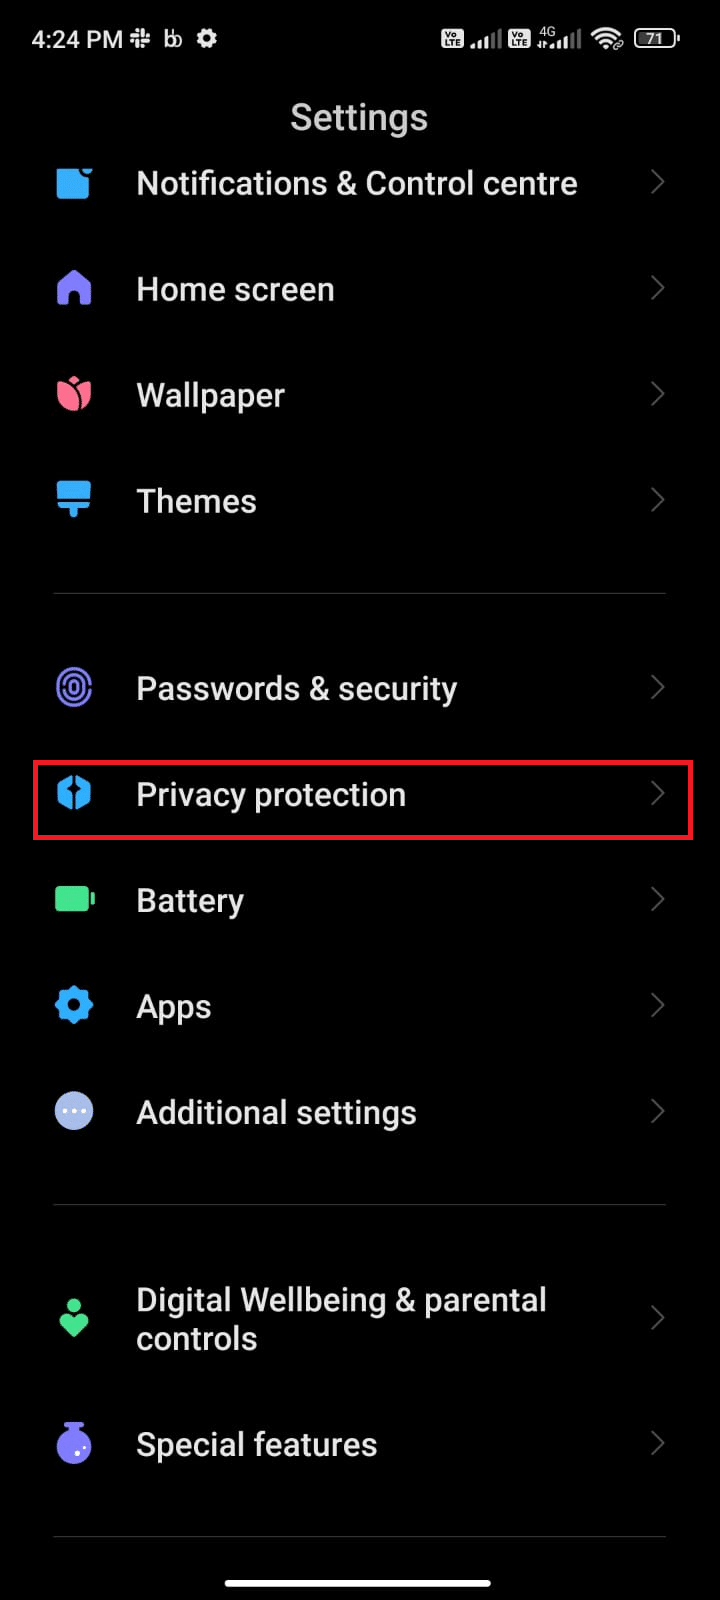 scroll down the screen and tap Privacy protection